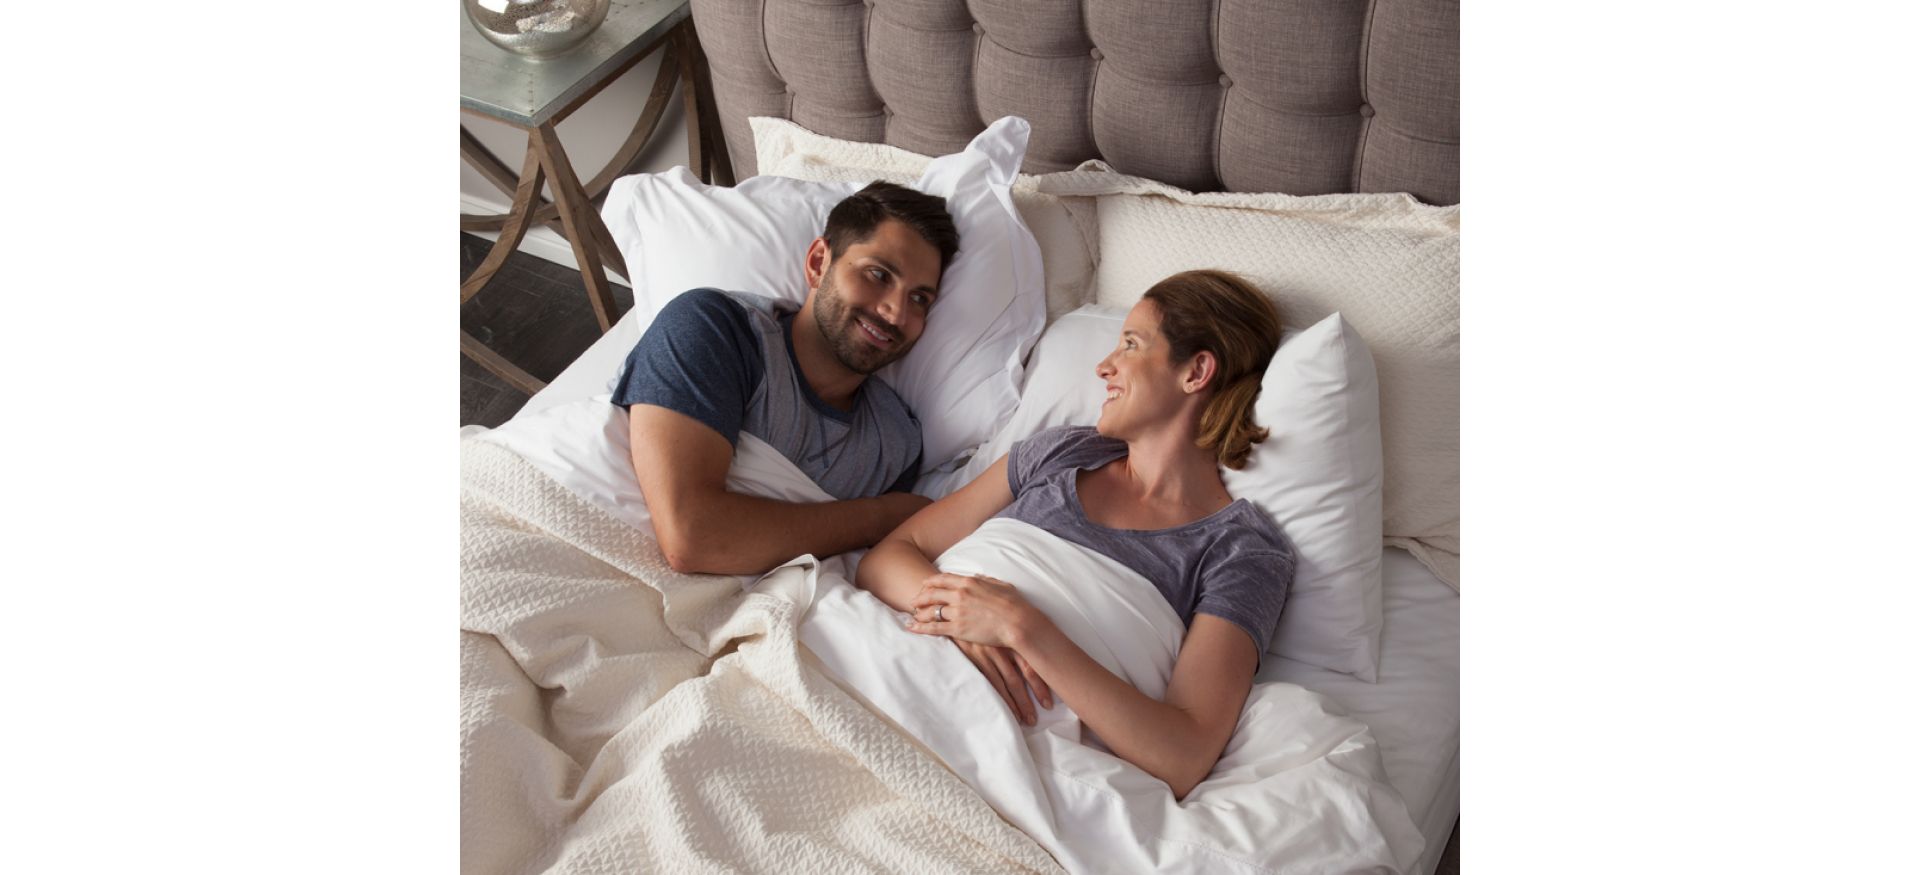 man and woman laying in bed together gazing into each other's eyes